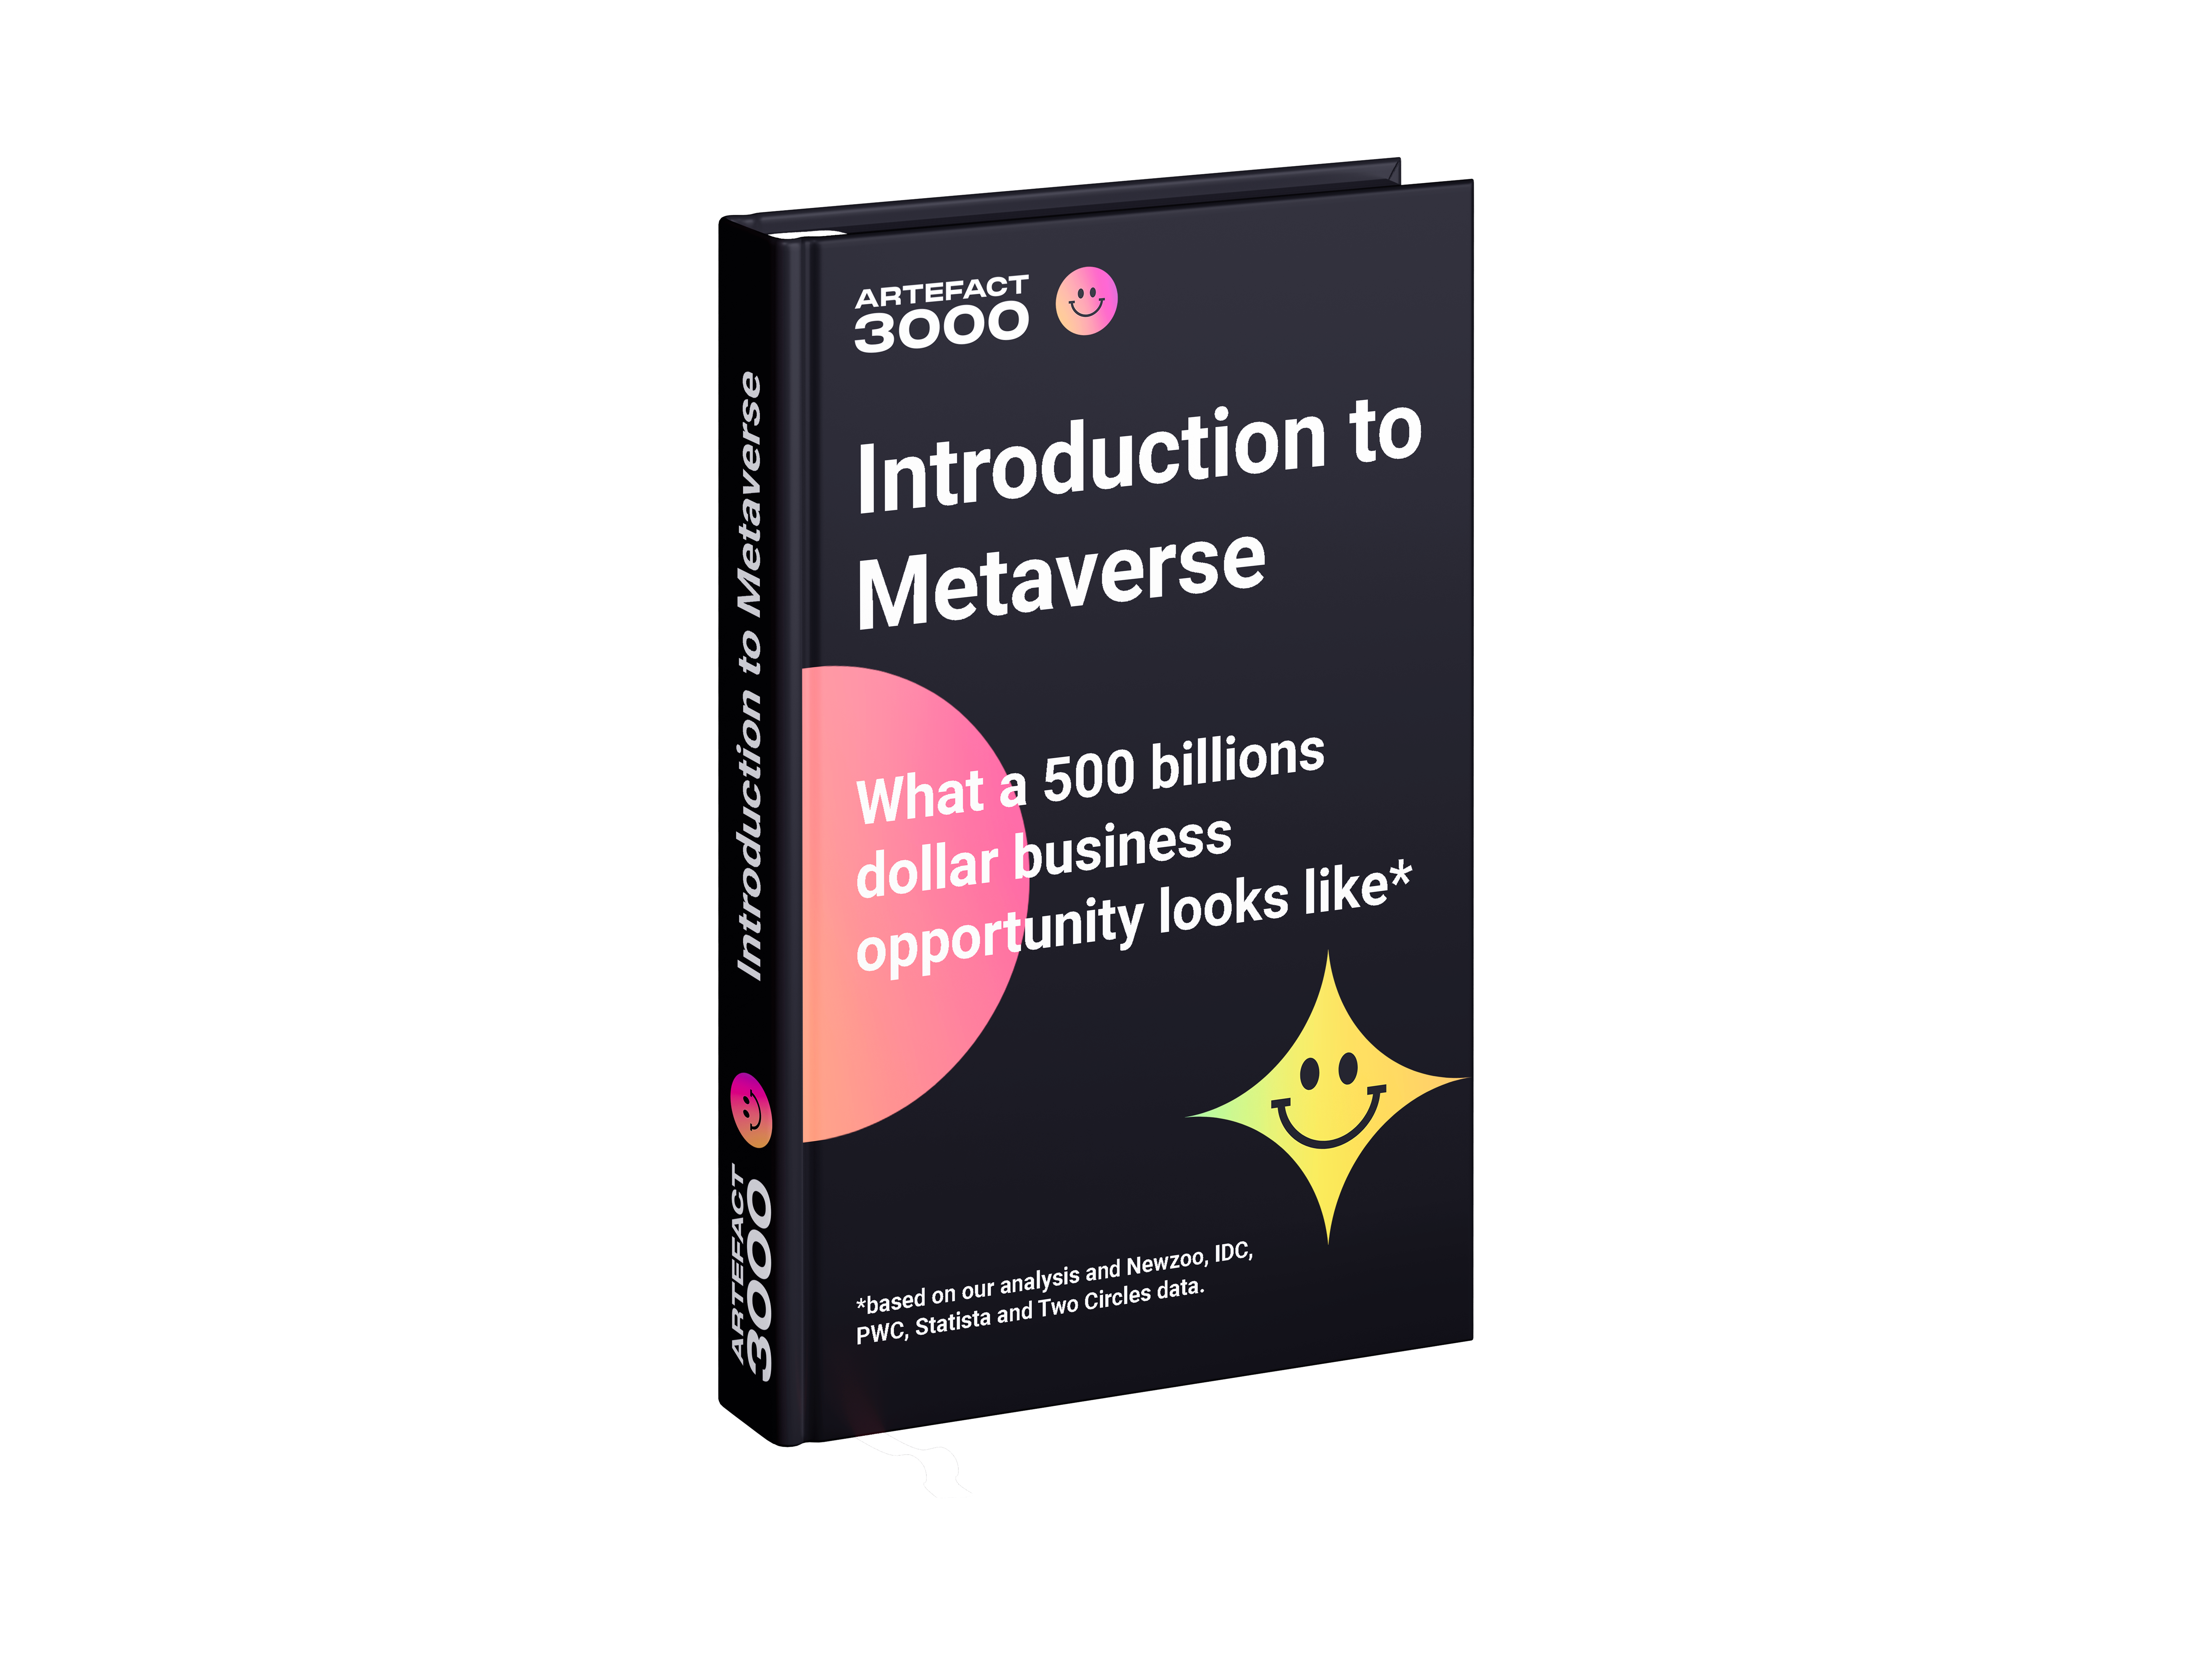 Artefact 3000 Guide – Introduction to Metaverse